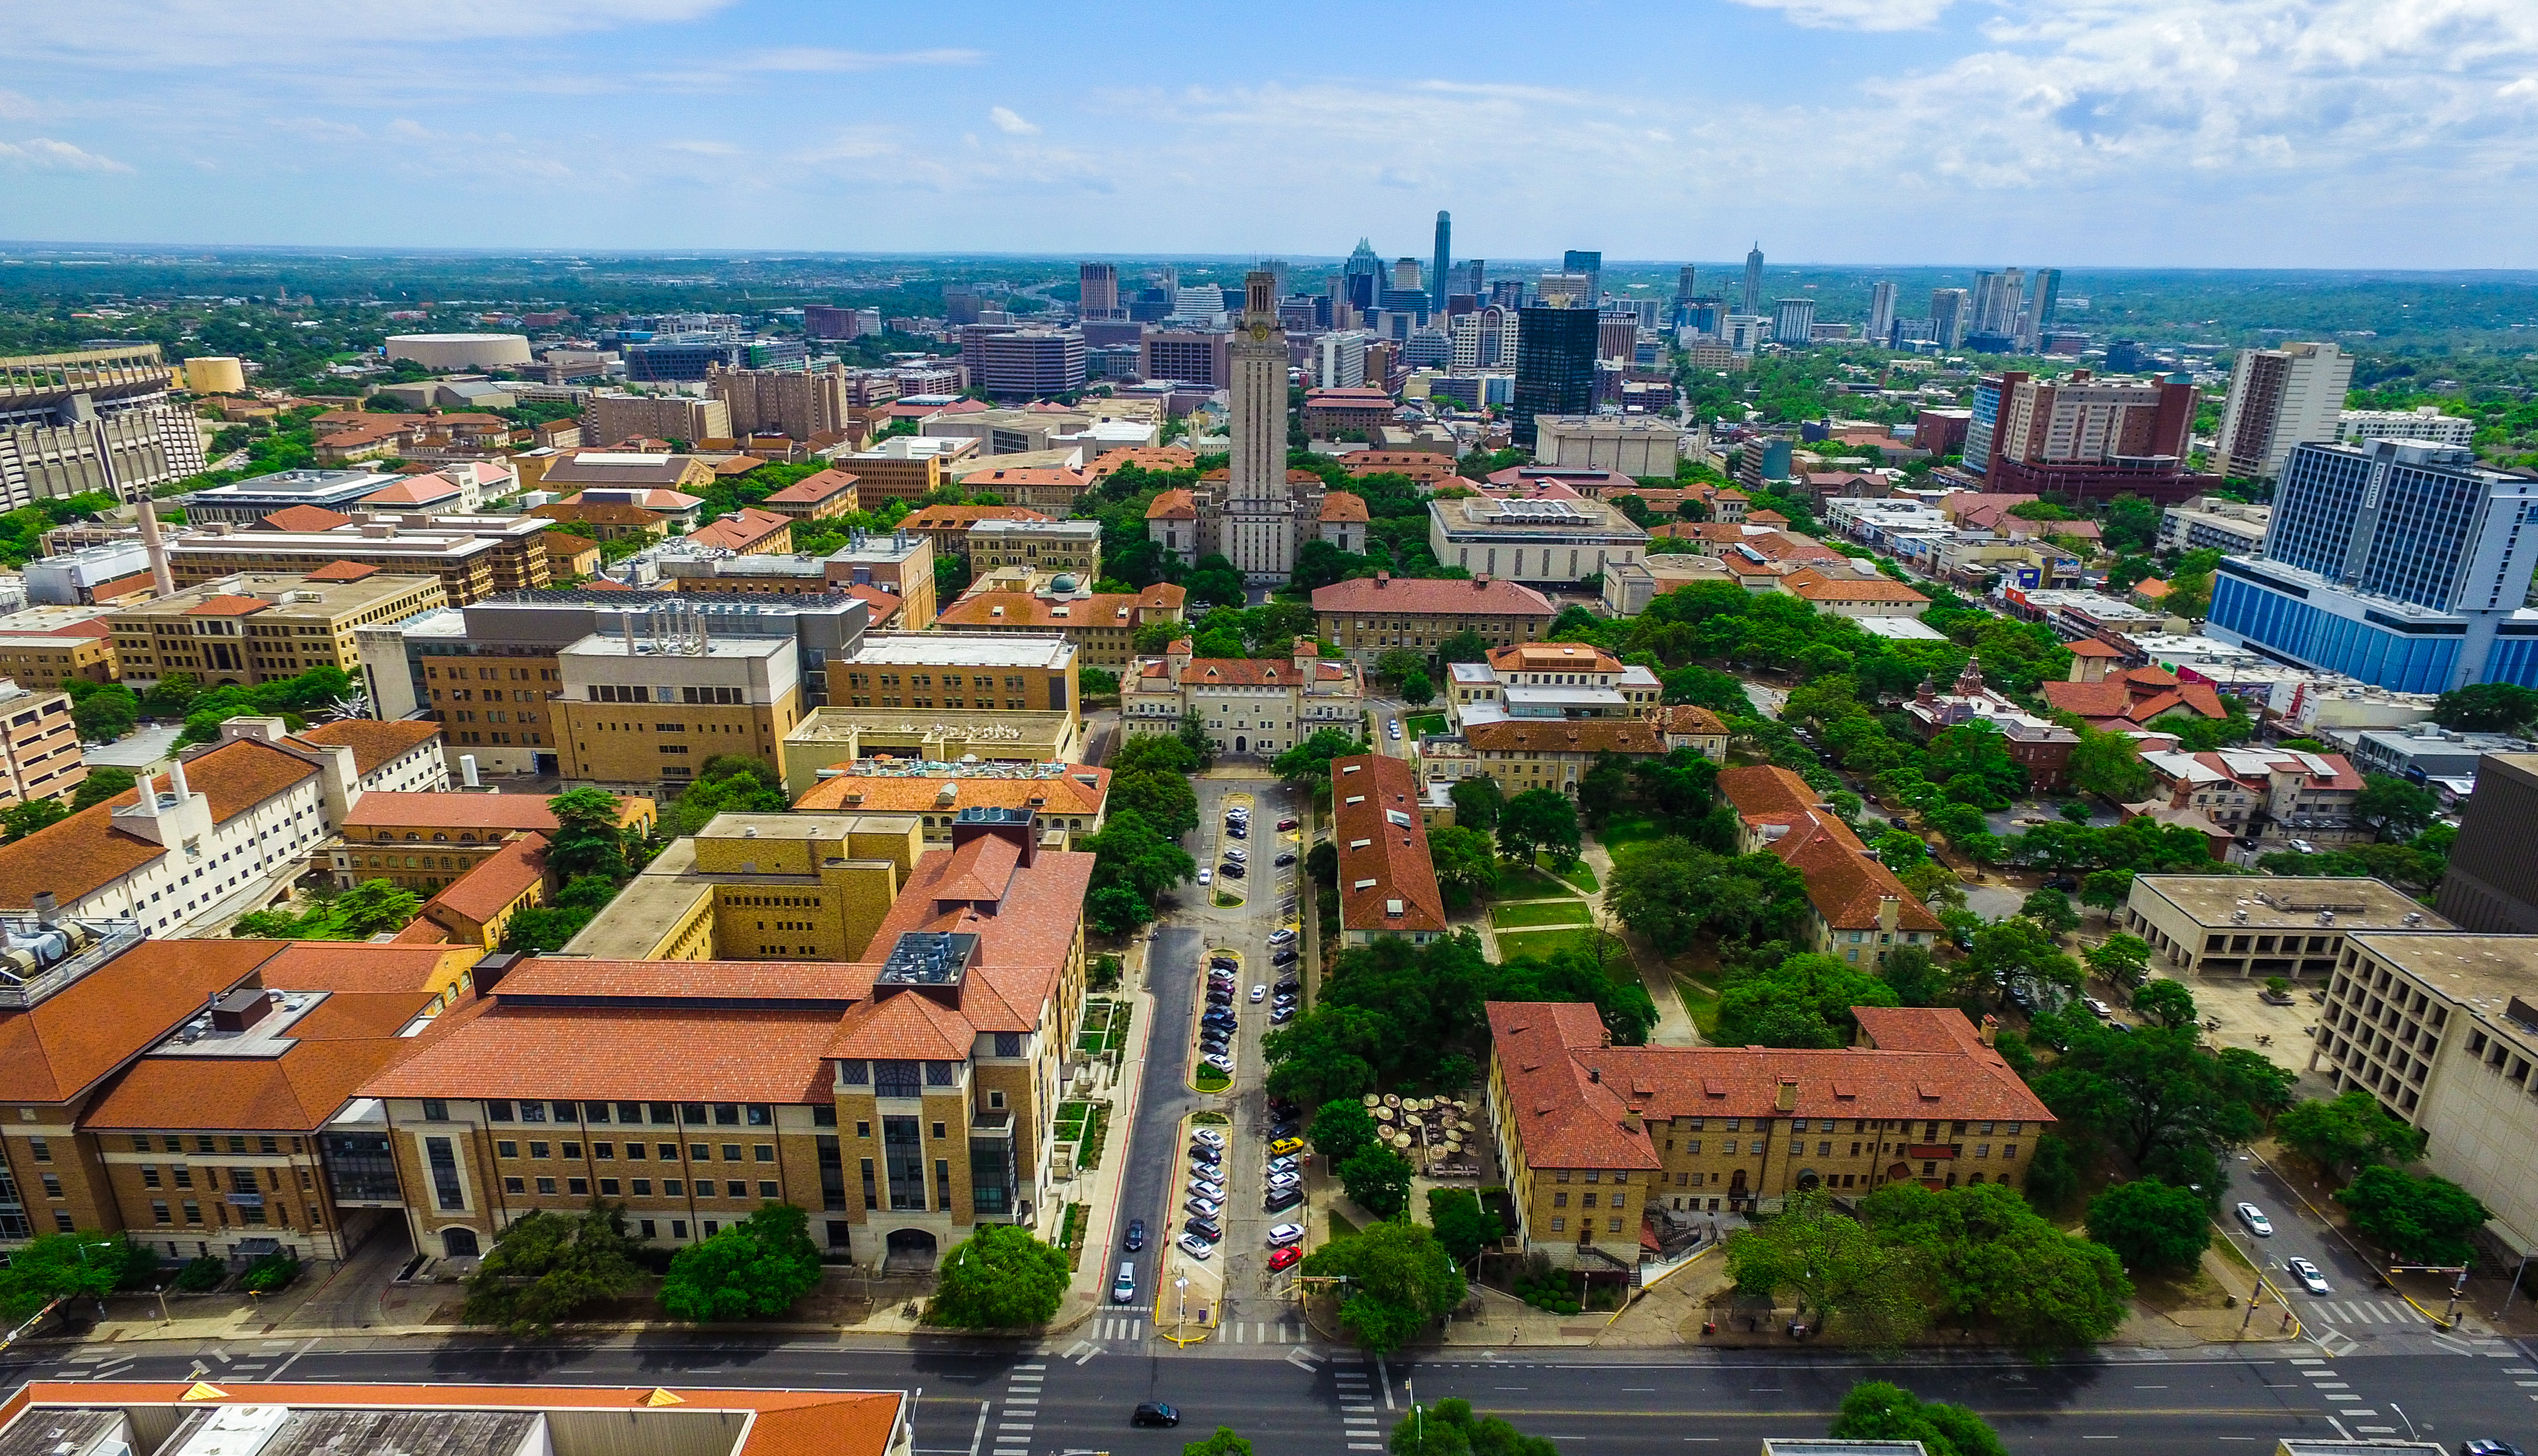 University of Texas - Austin Off-Campus Housing Guide